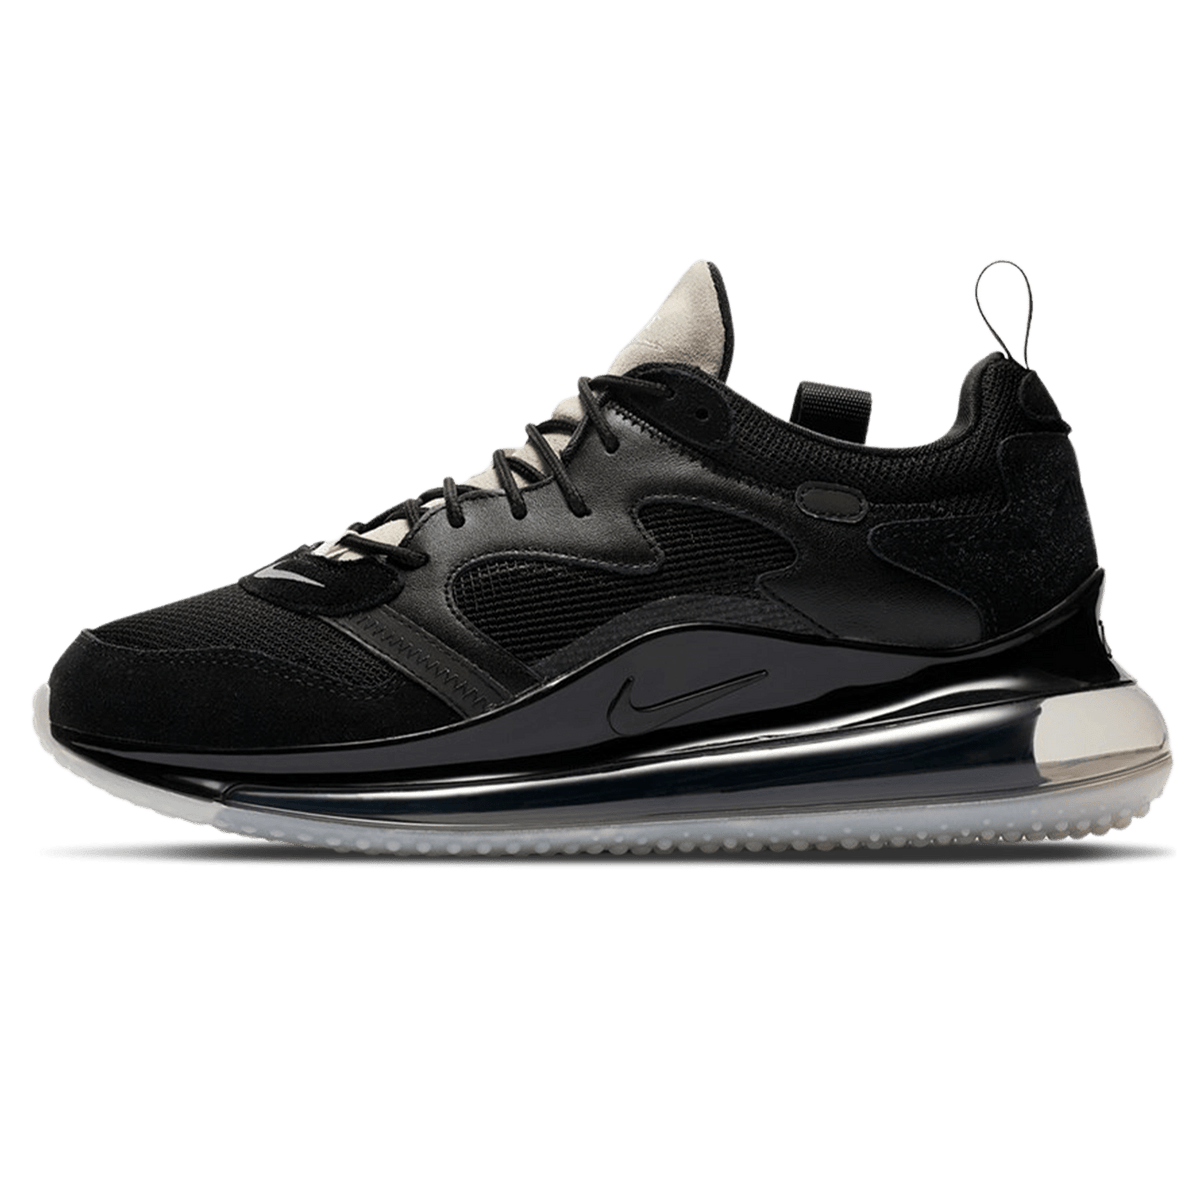 Nike Air Max 720 x Odell Beckham Jr 'Young King Of The Night' - JuzsportsShops